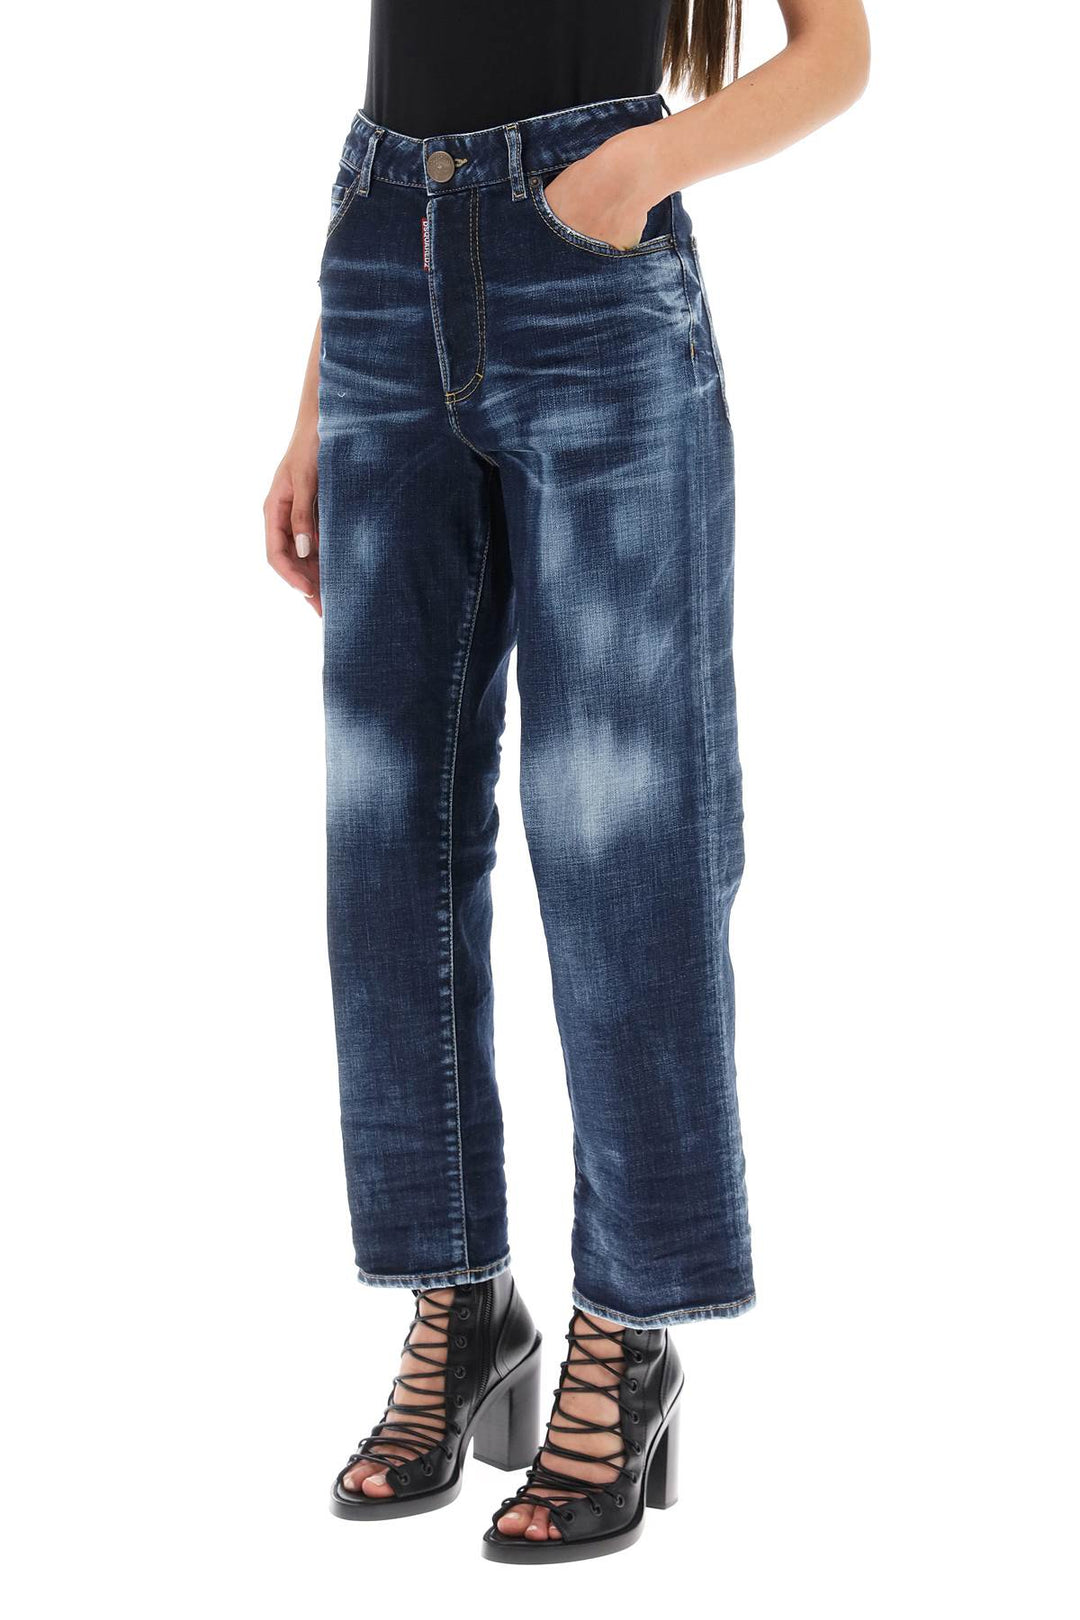 Jeans Cropped 'Boston' - Dsquared2 - Donna